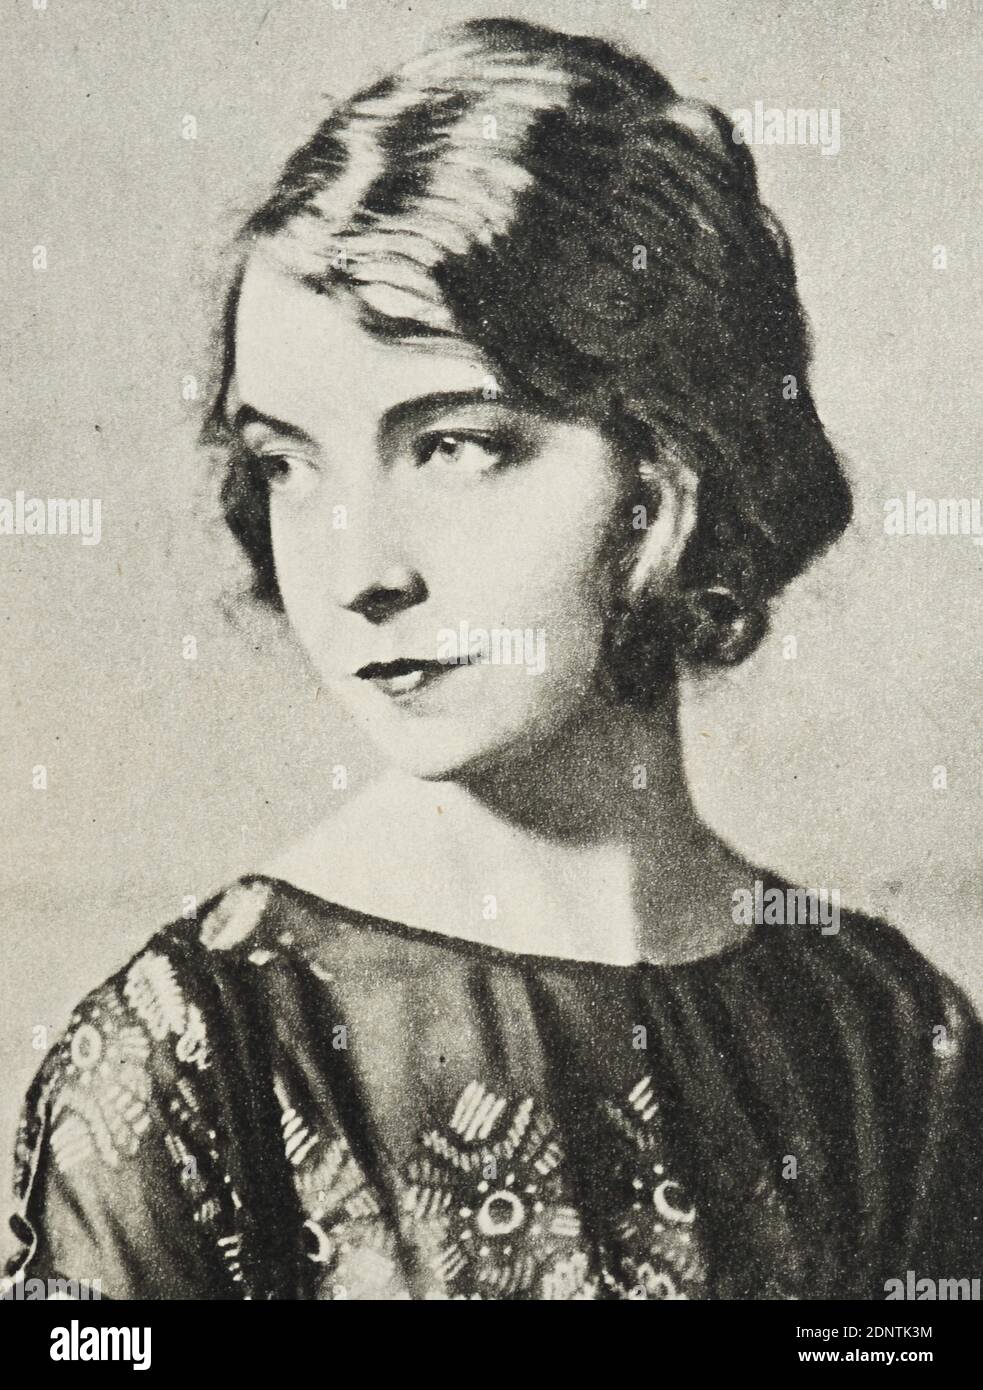 Photograph of Lillian Gish (1893-1993) an American actress and singer known as 'The First Lady of American Cinema'. Stock Photo